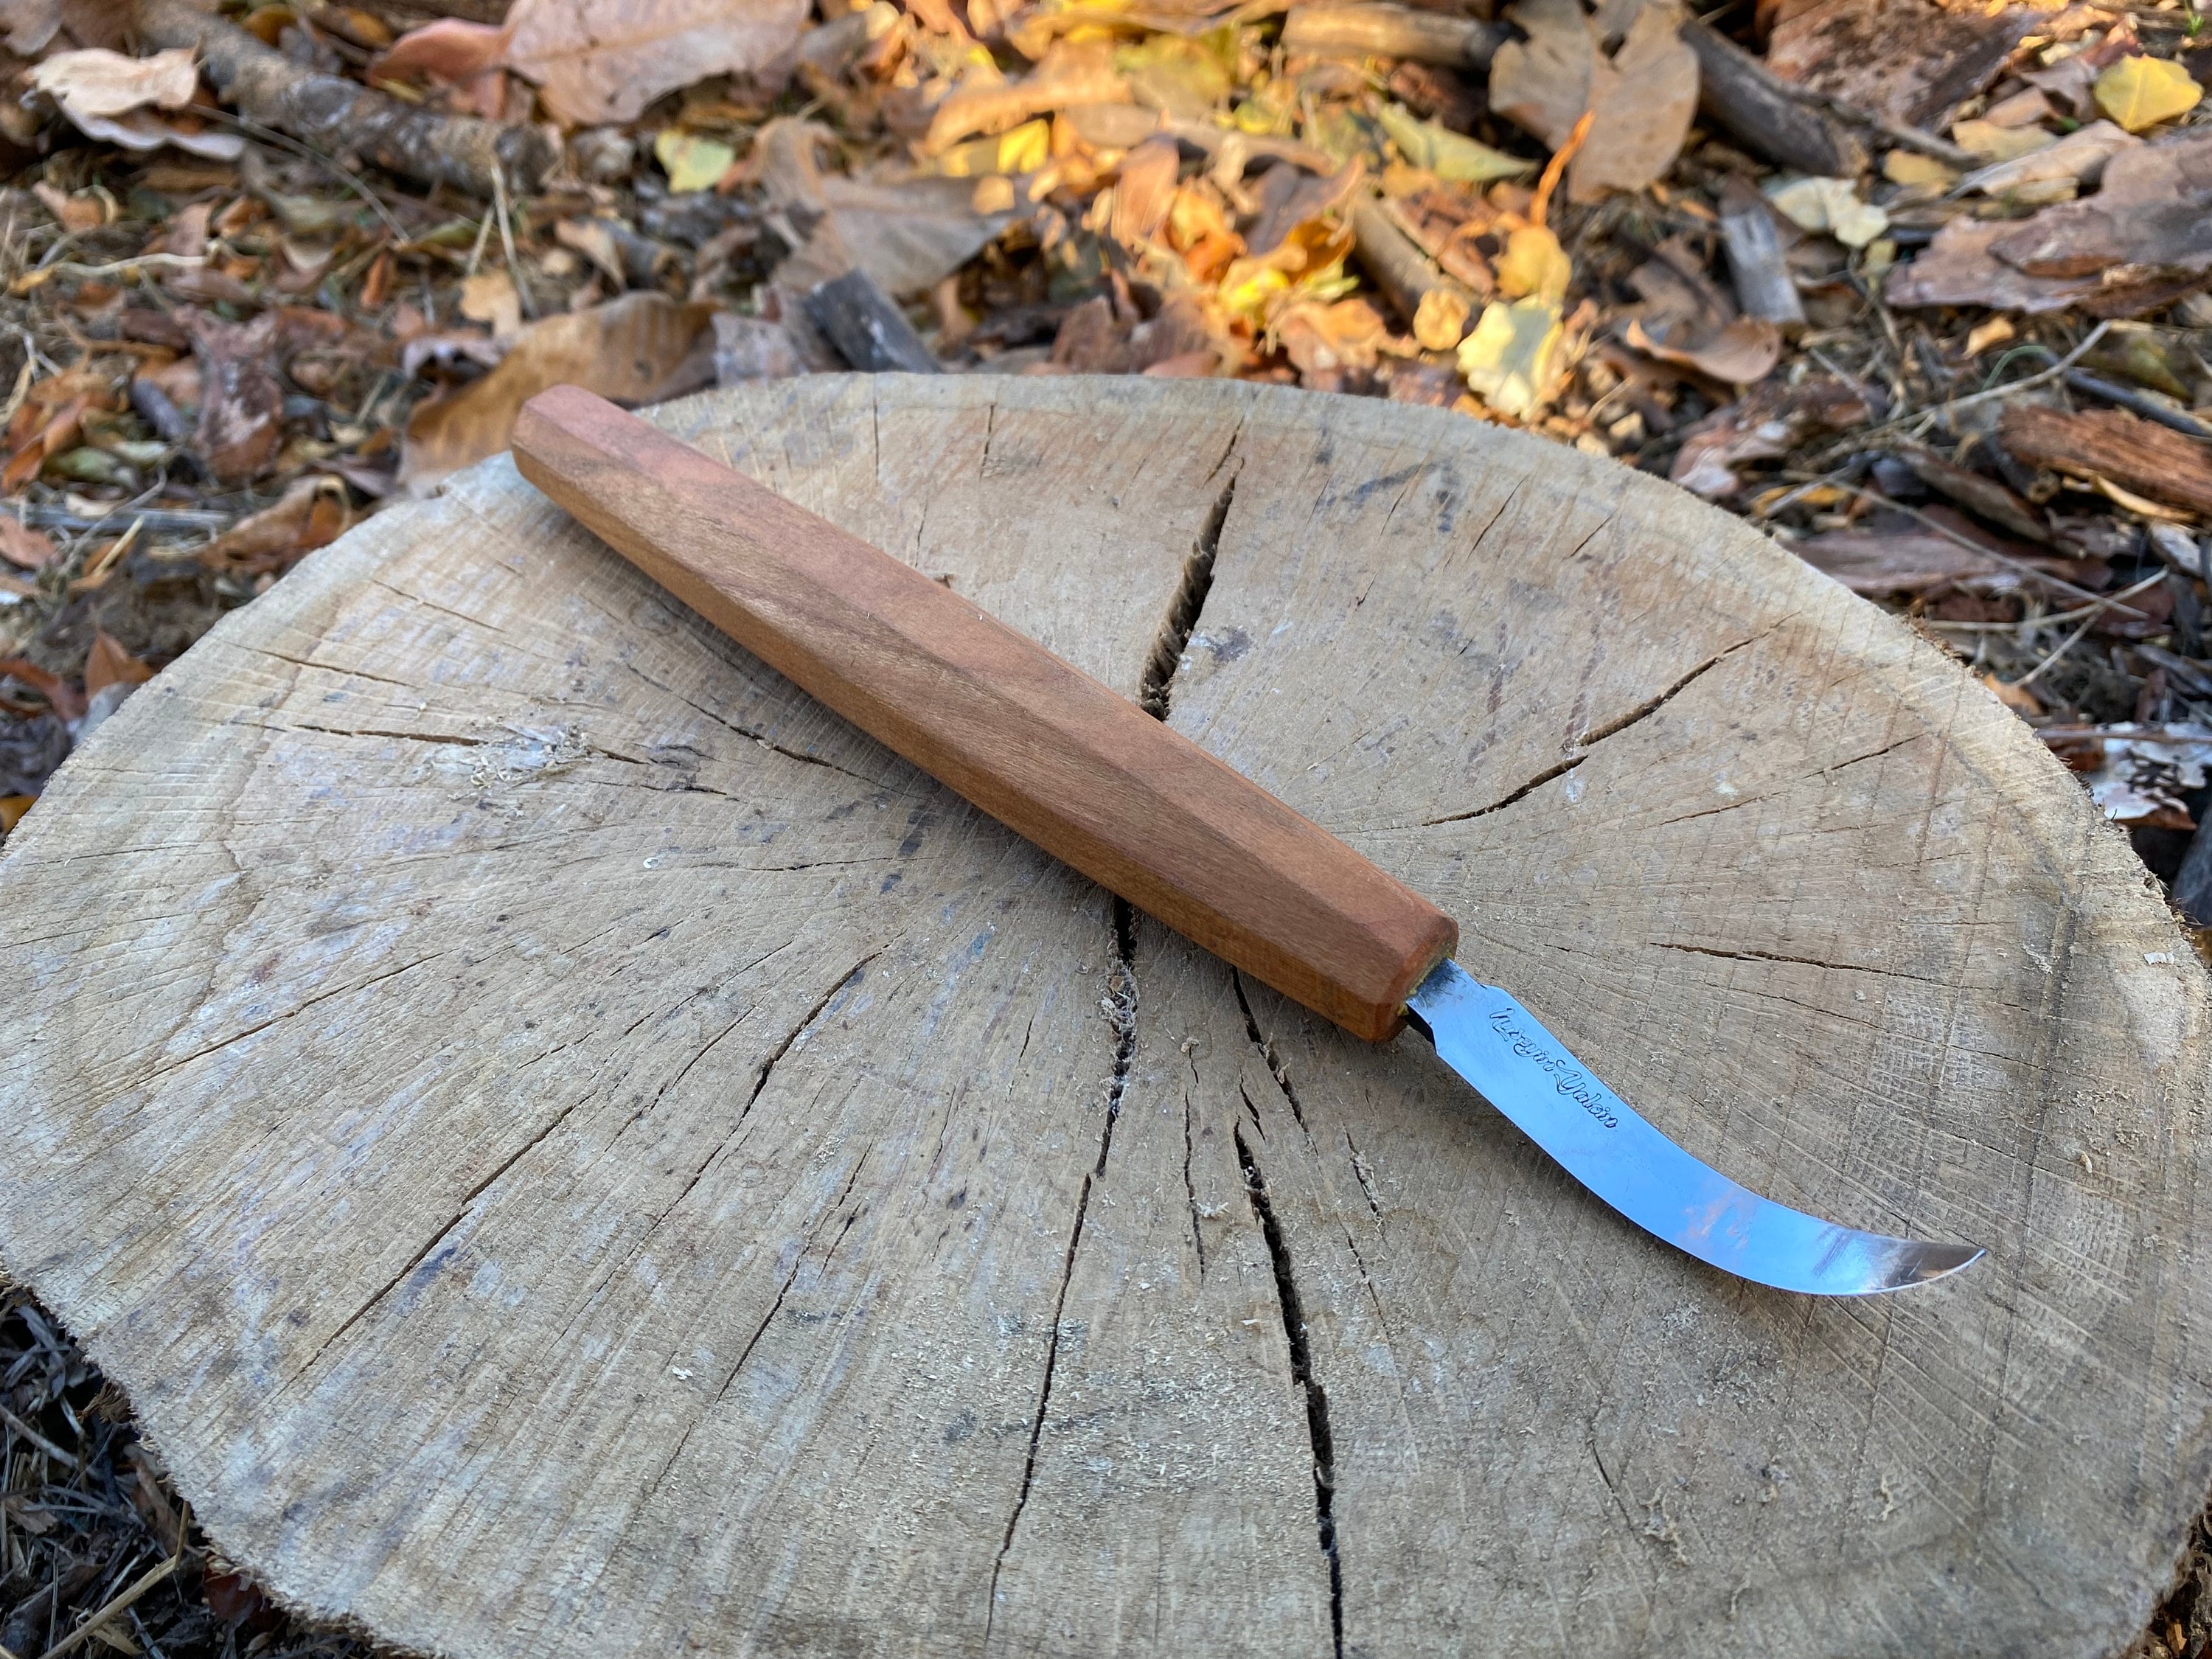 Sloyd Knife 80mm Curved Blade, Wood Carving Knife, Spoon Carving Knife,  Puukko Knife, Kuksa Knife, Carving Tool 